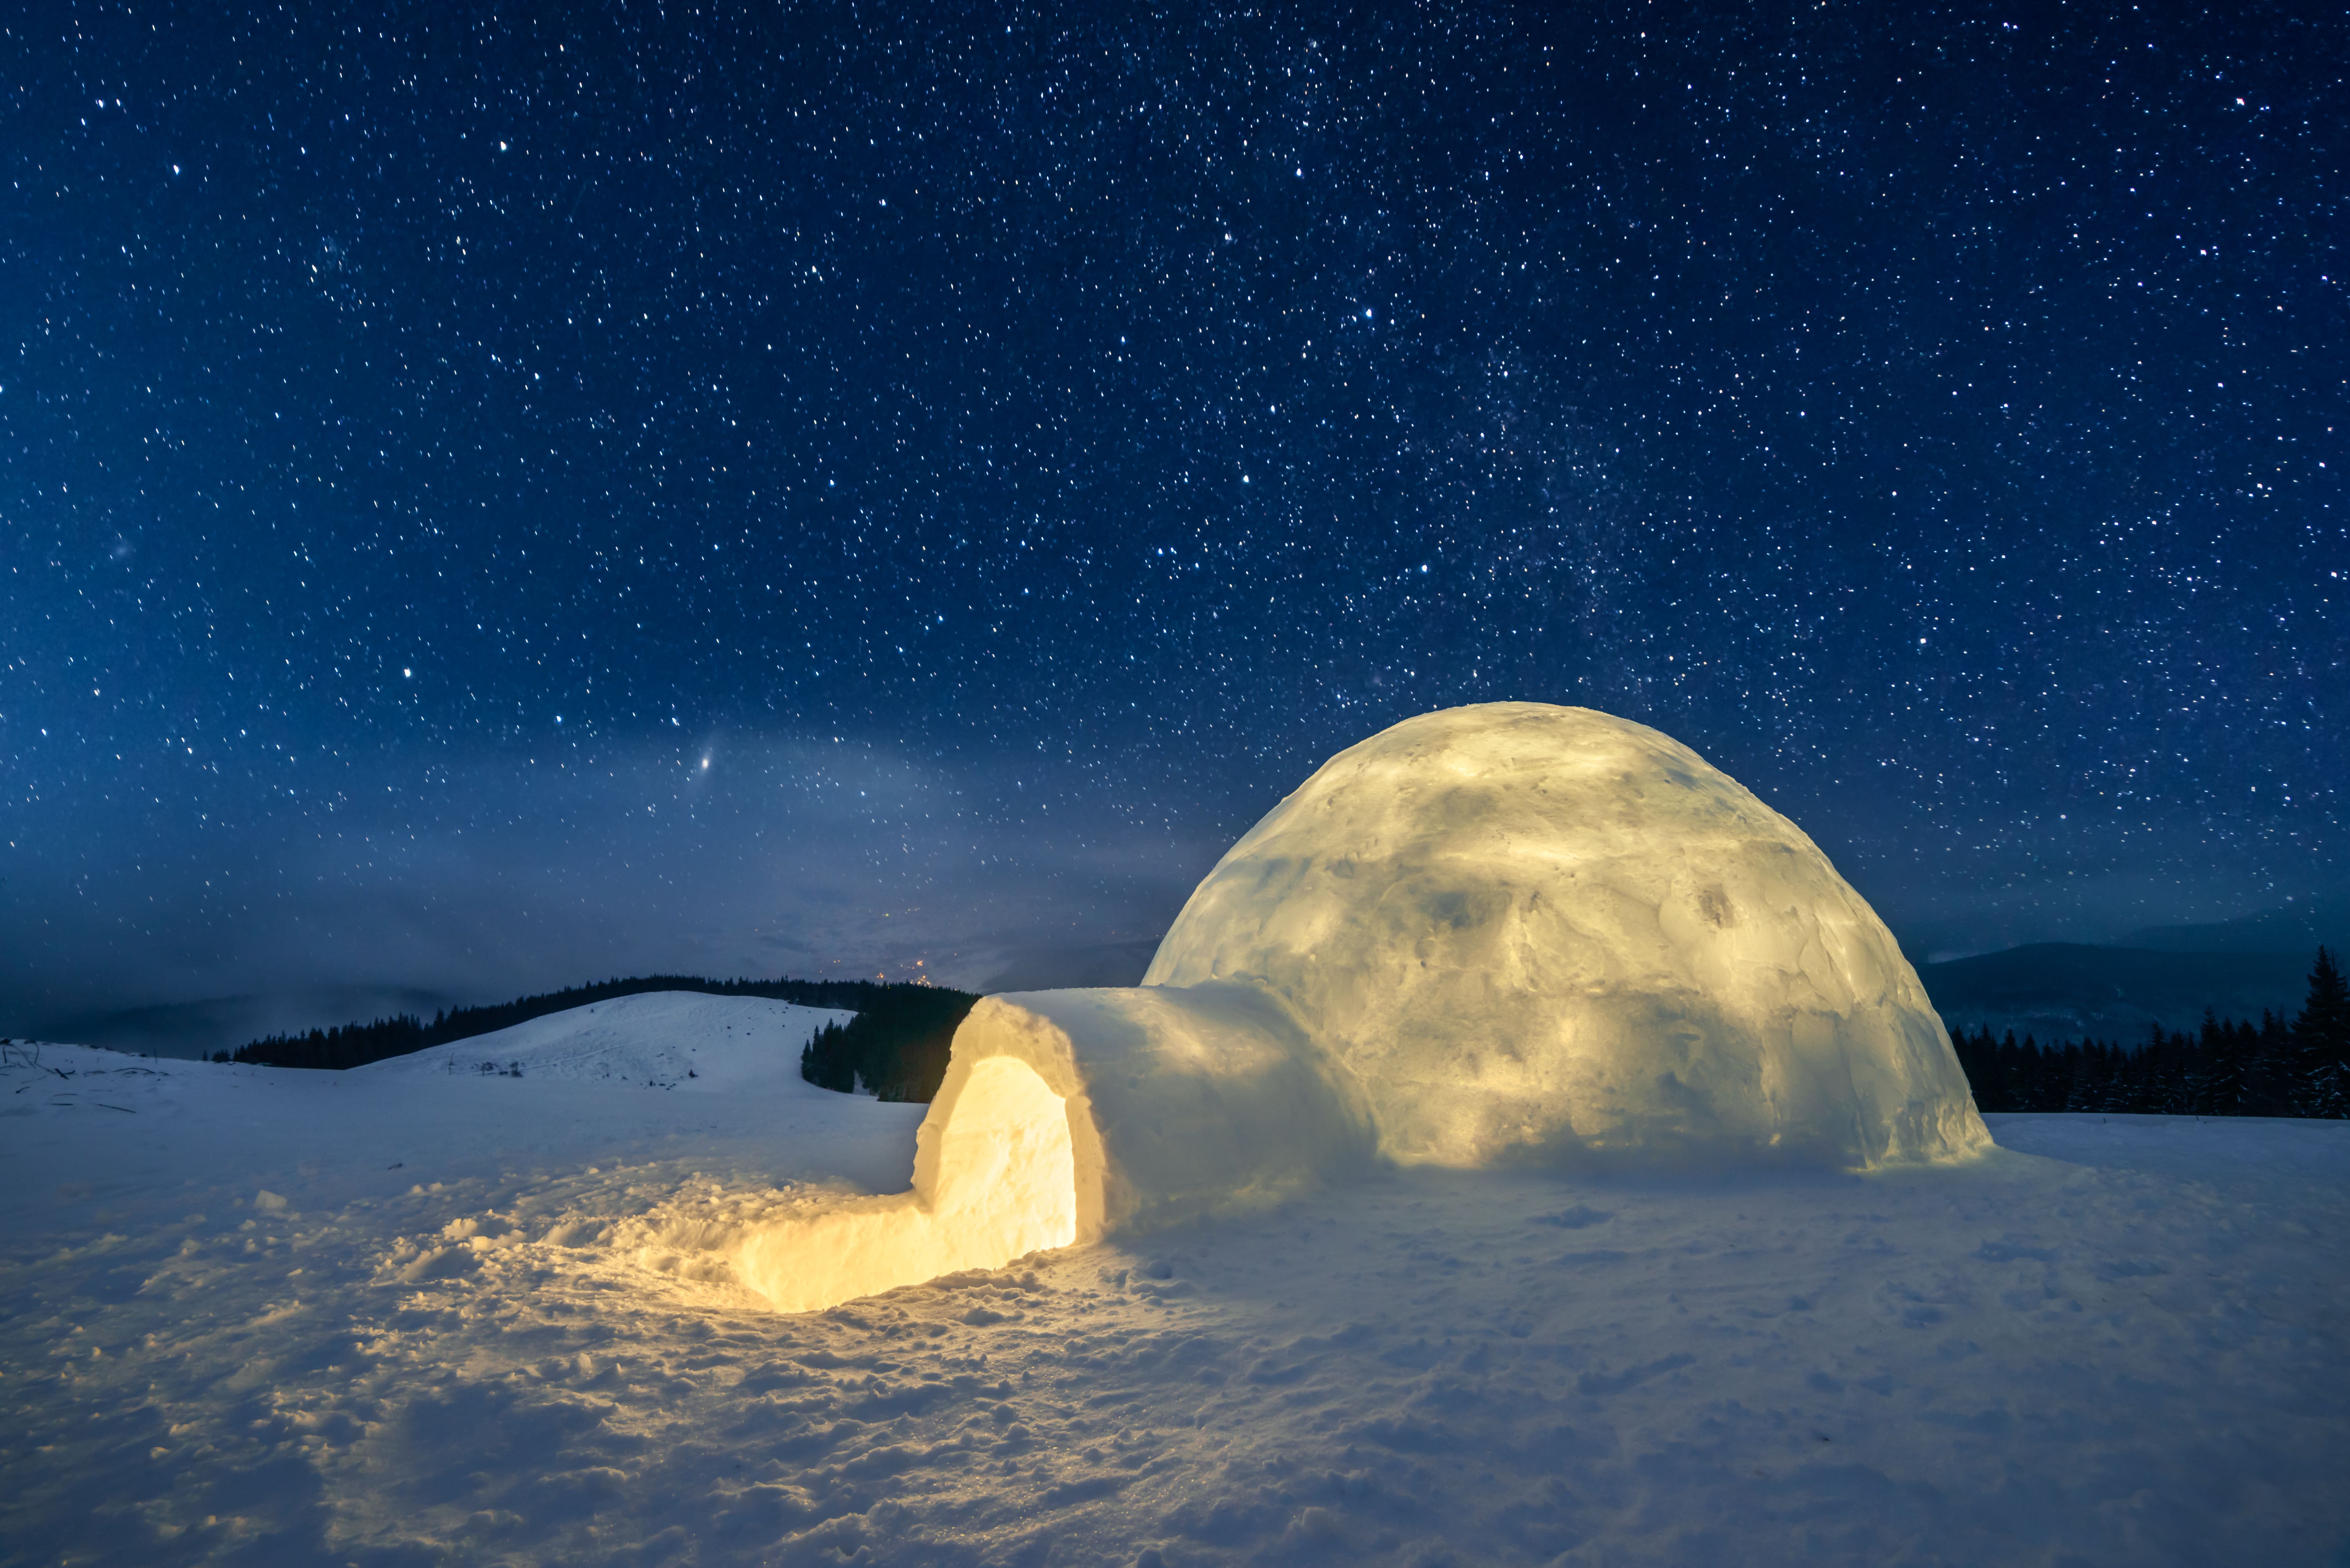 An igloo glows against a starlit backdrop and a snow-capped landscape.